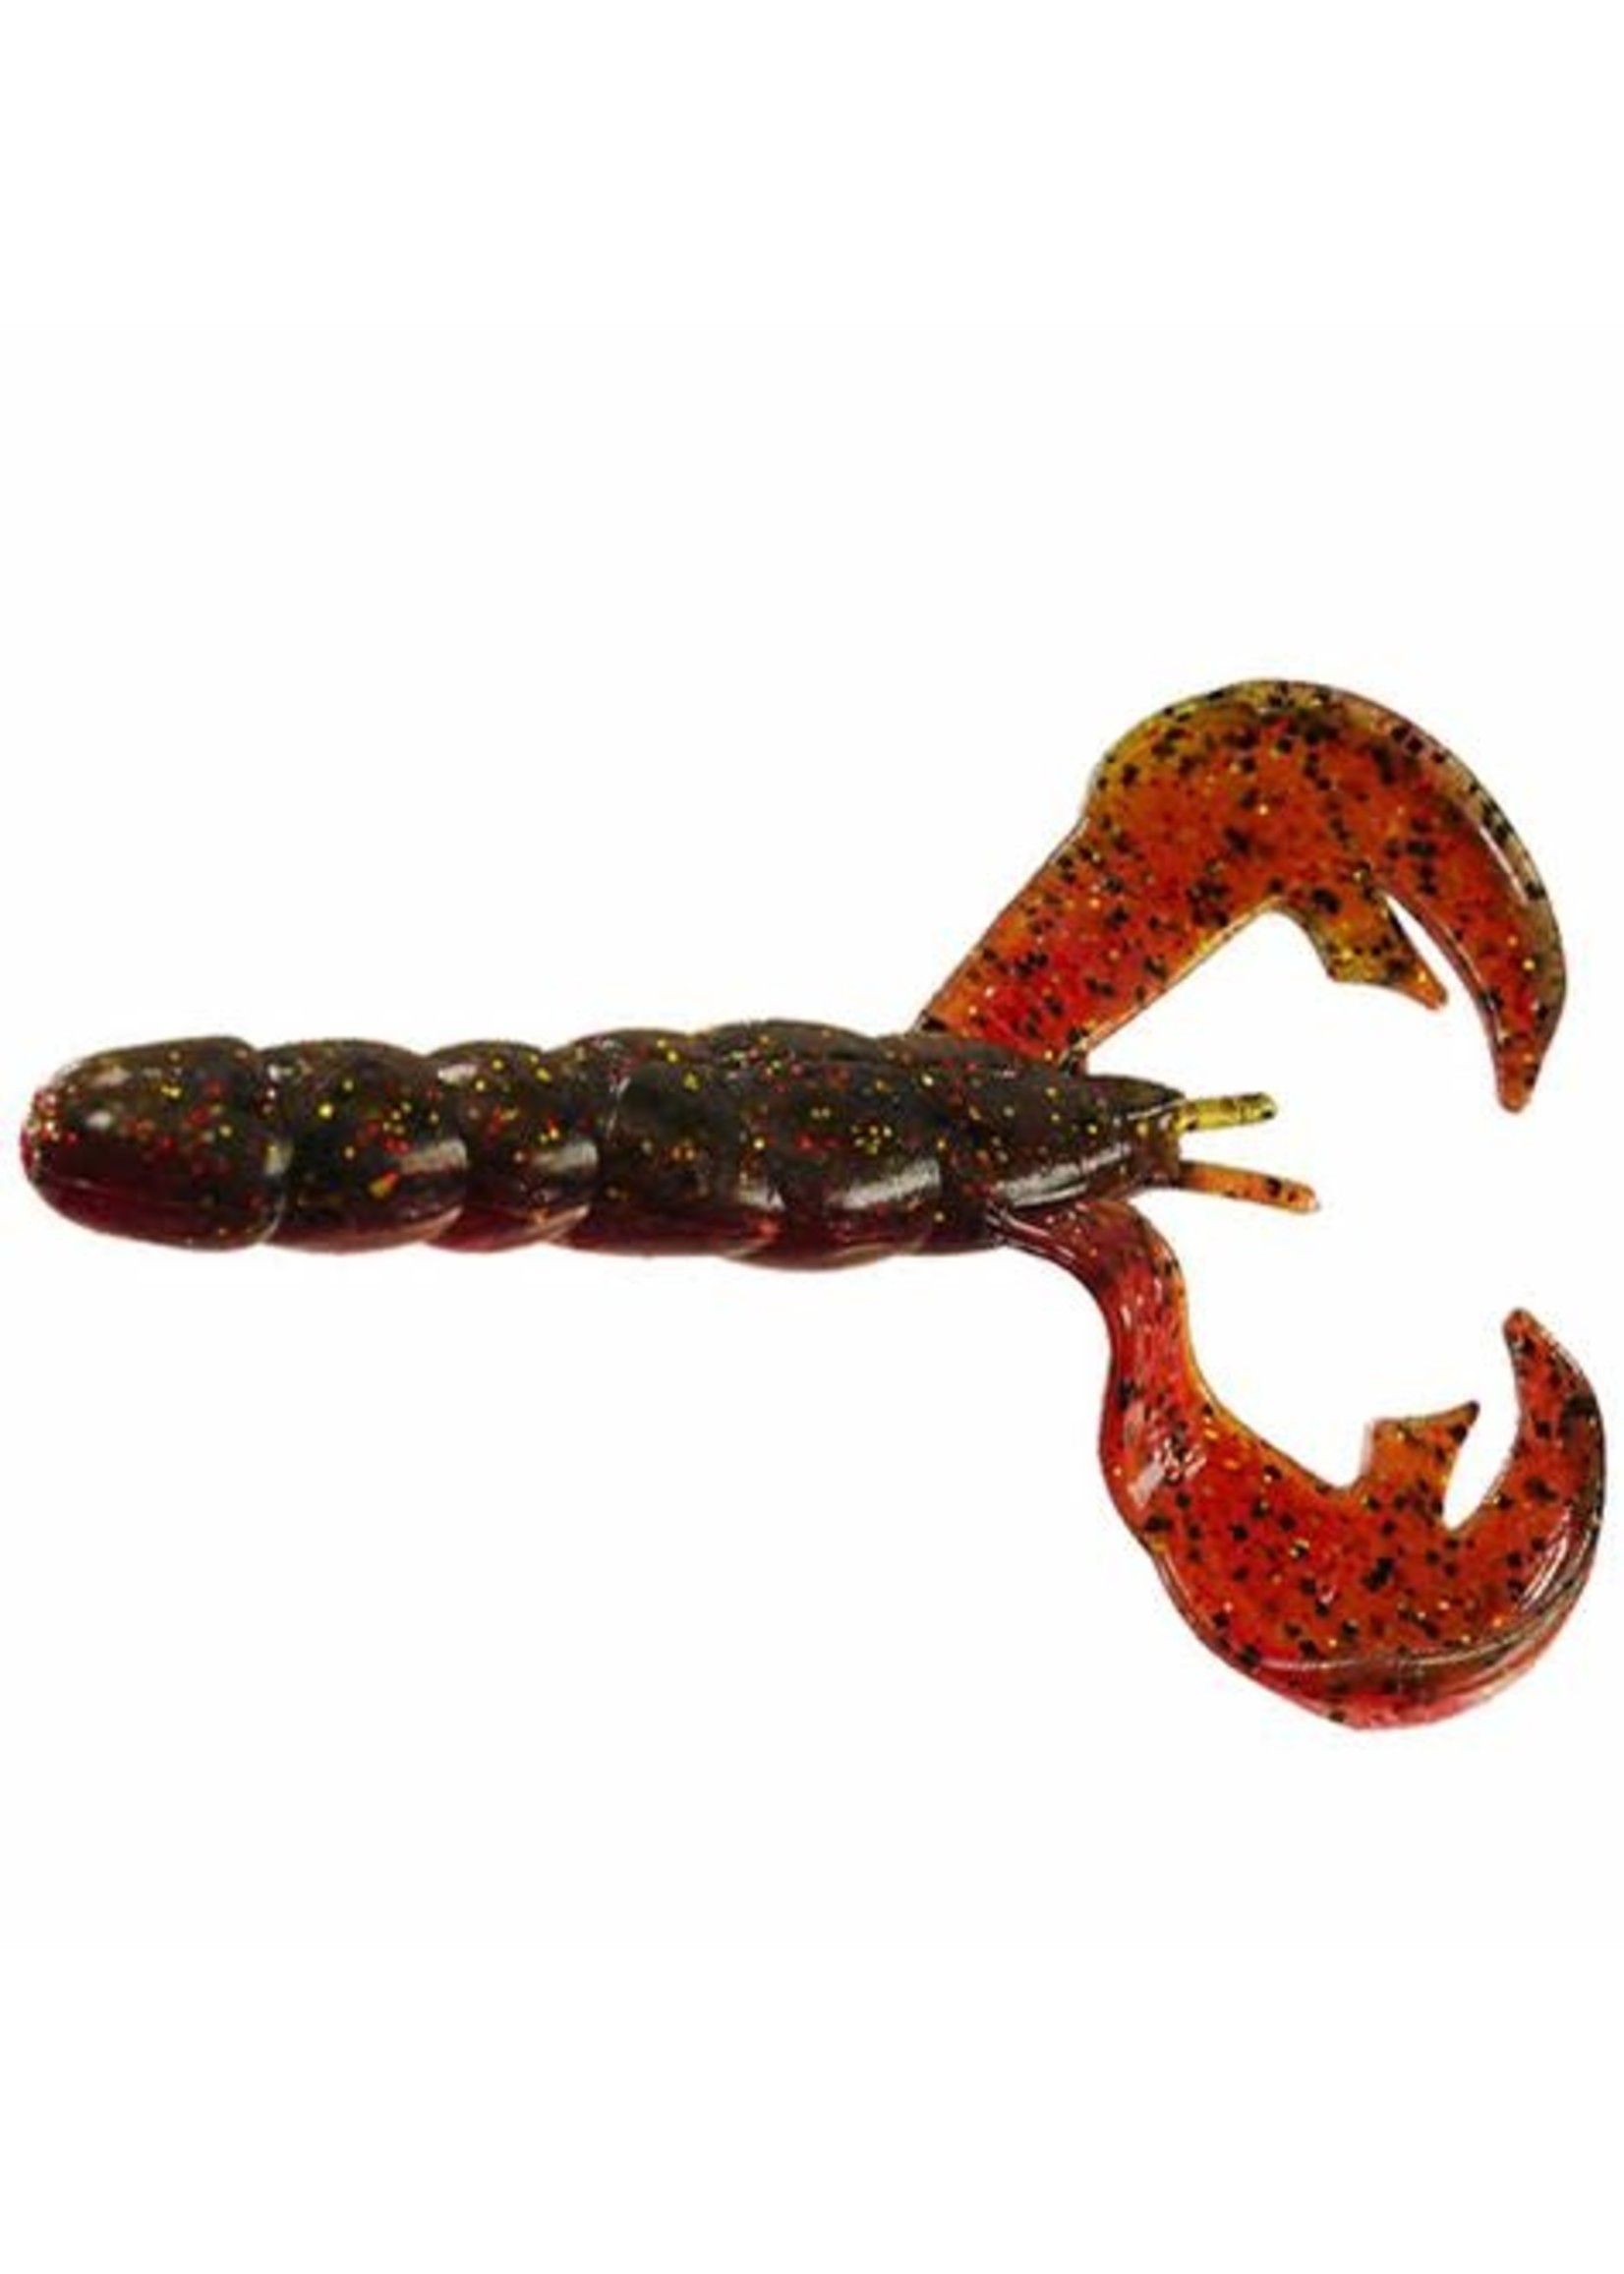 STRIKE KING Rage Craw - Rugged Shoal Outfitters